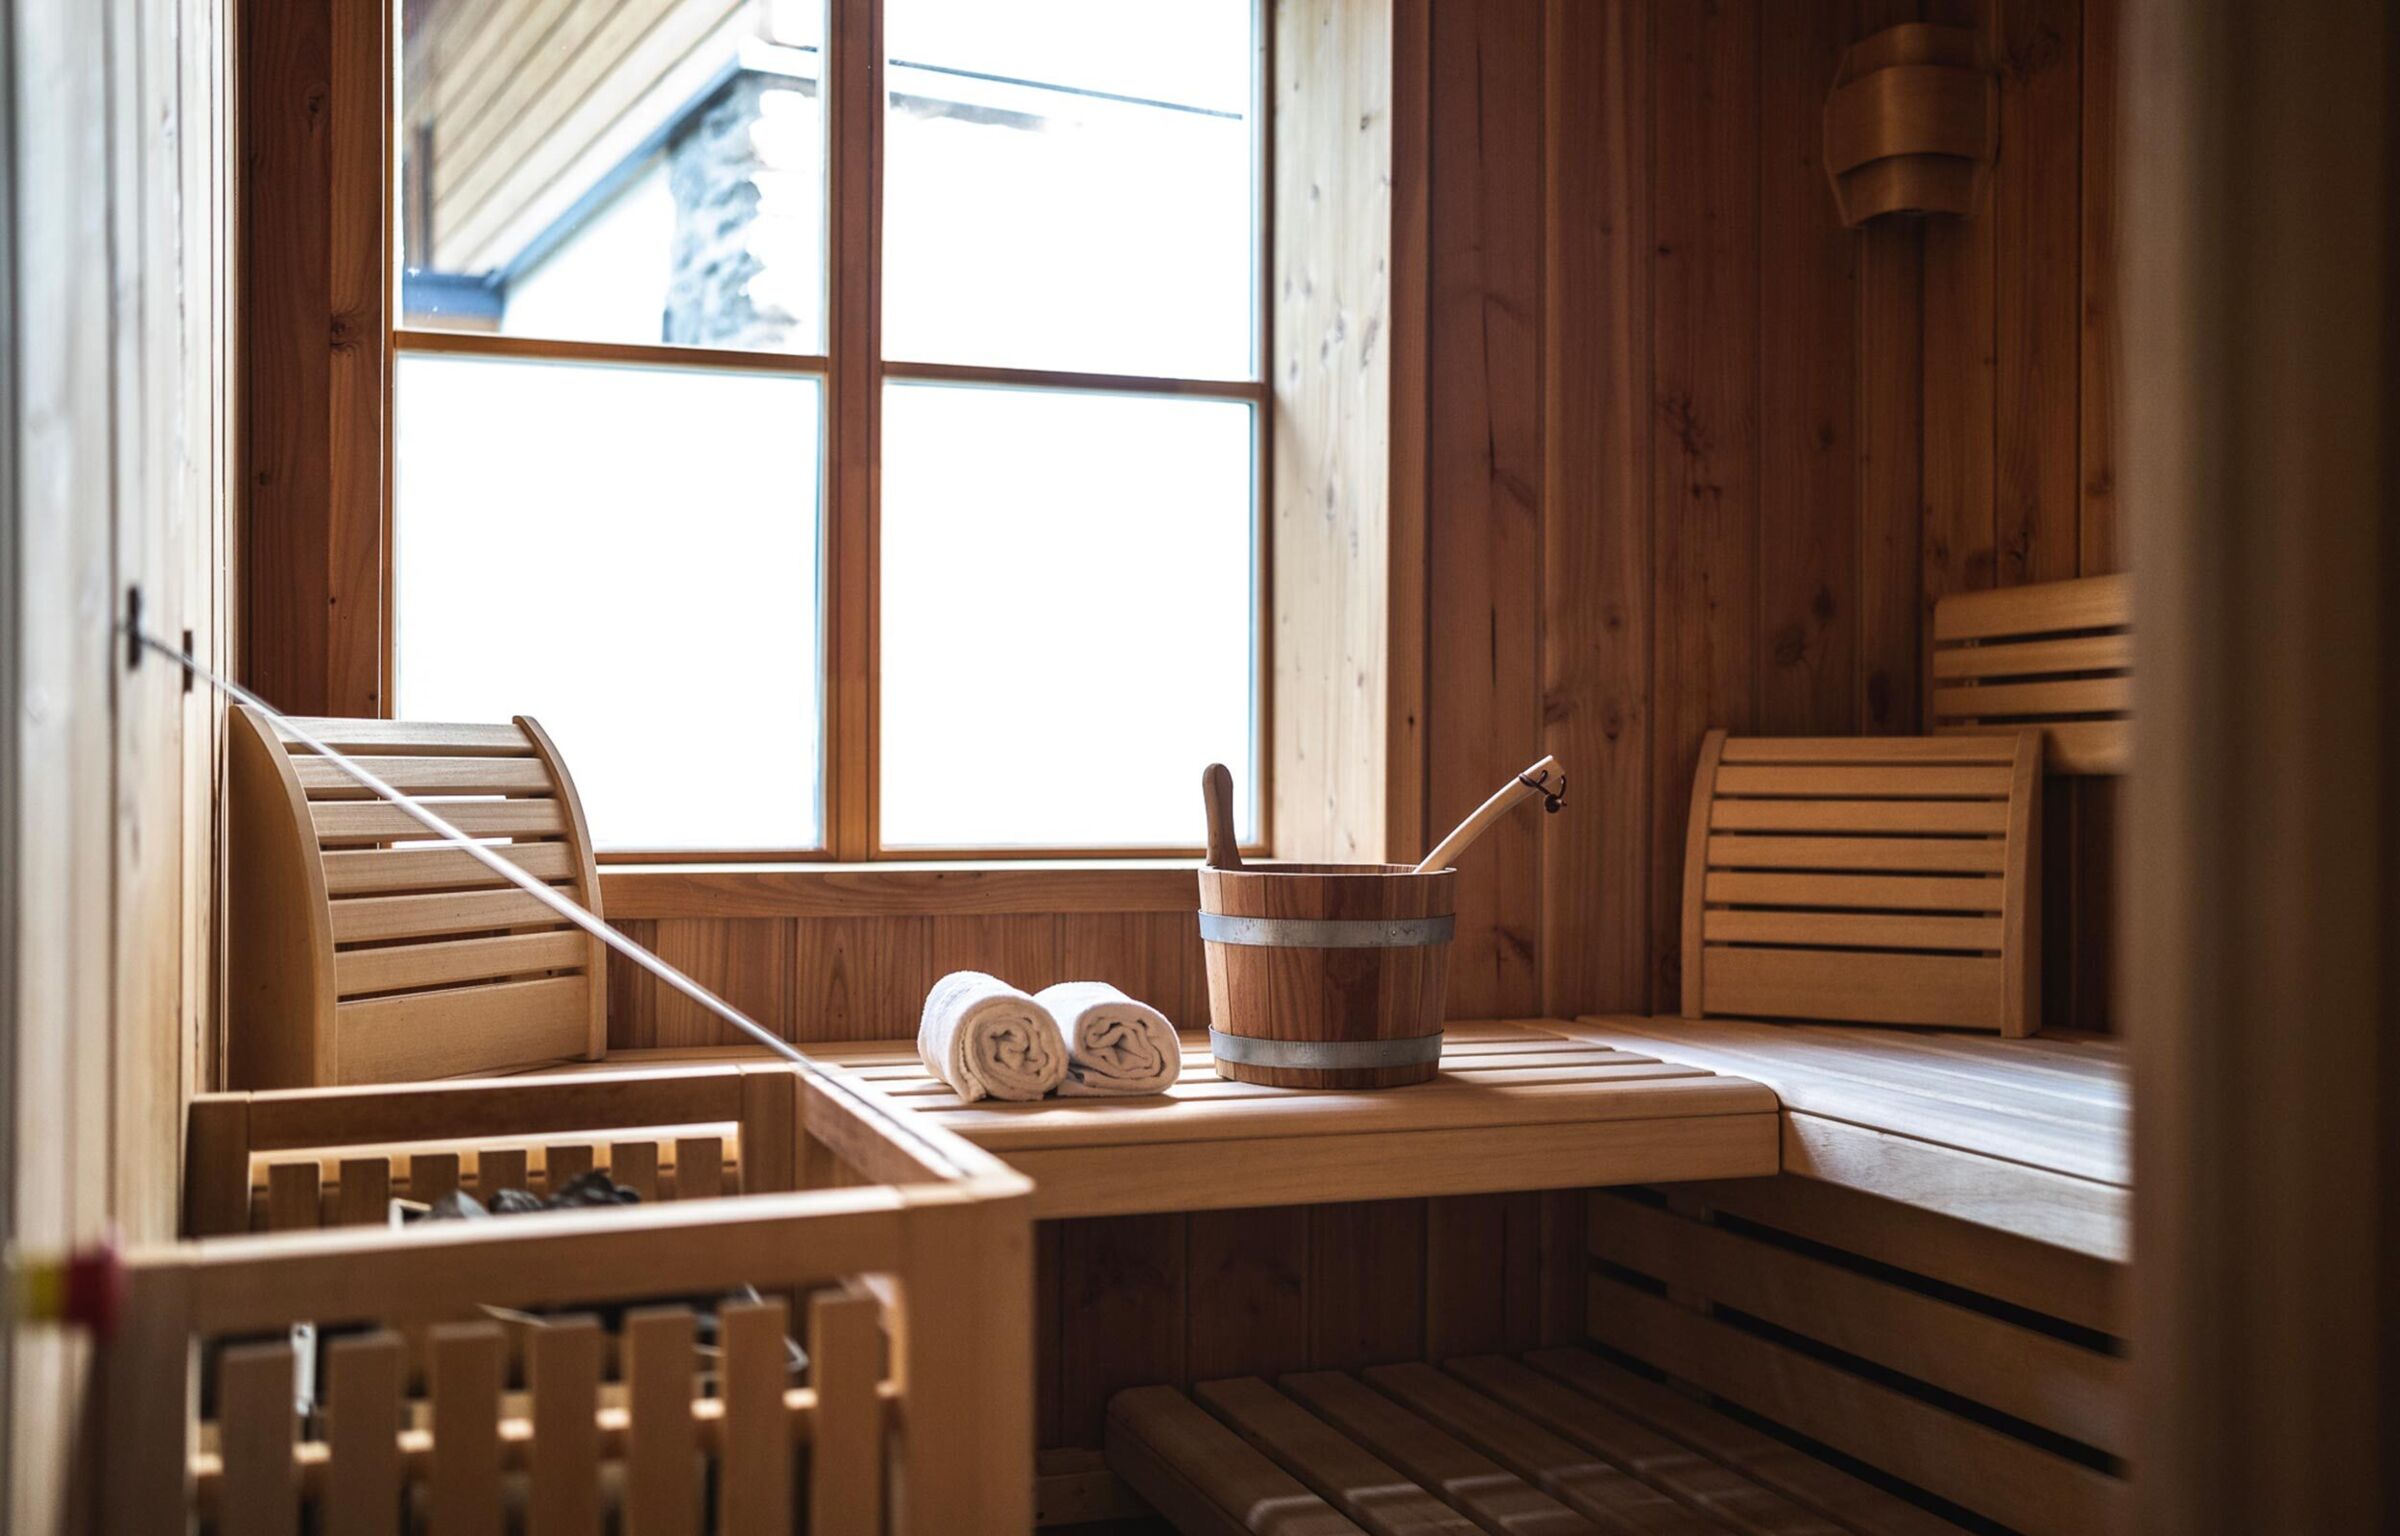 The wood-heated sauna at the Hof Chalets in Carinthia.